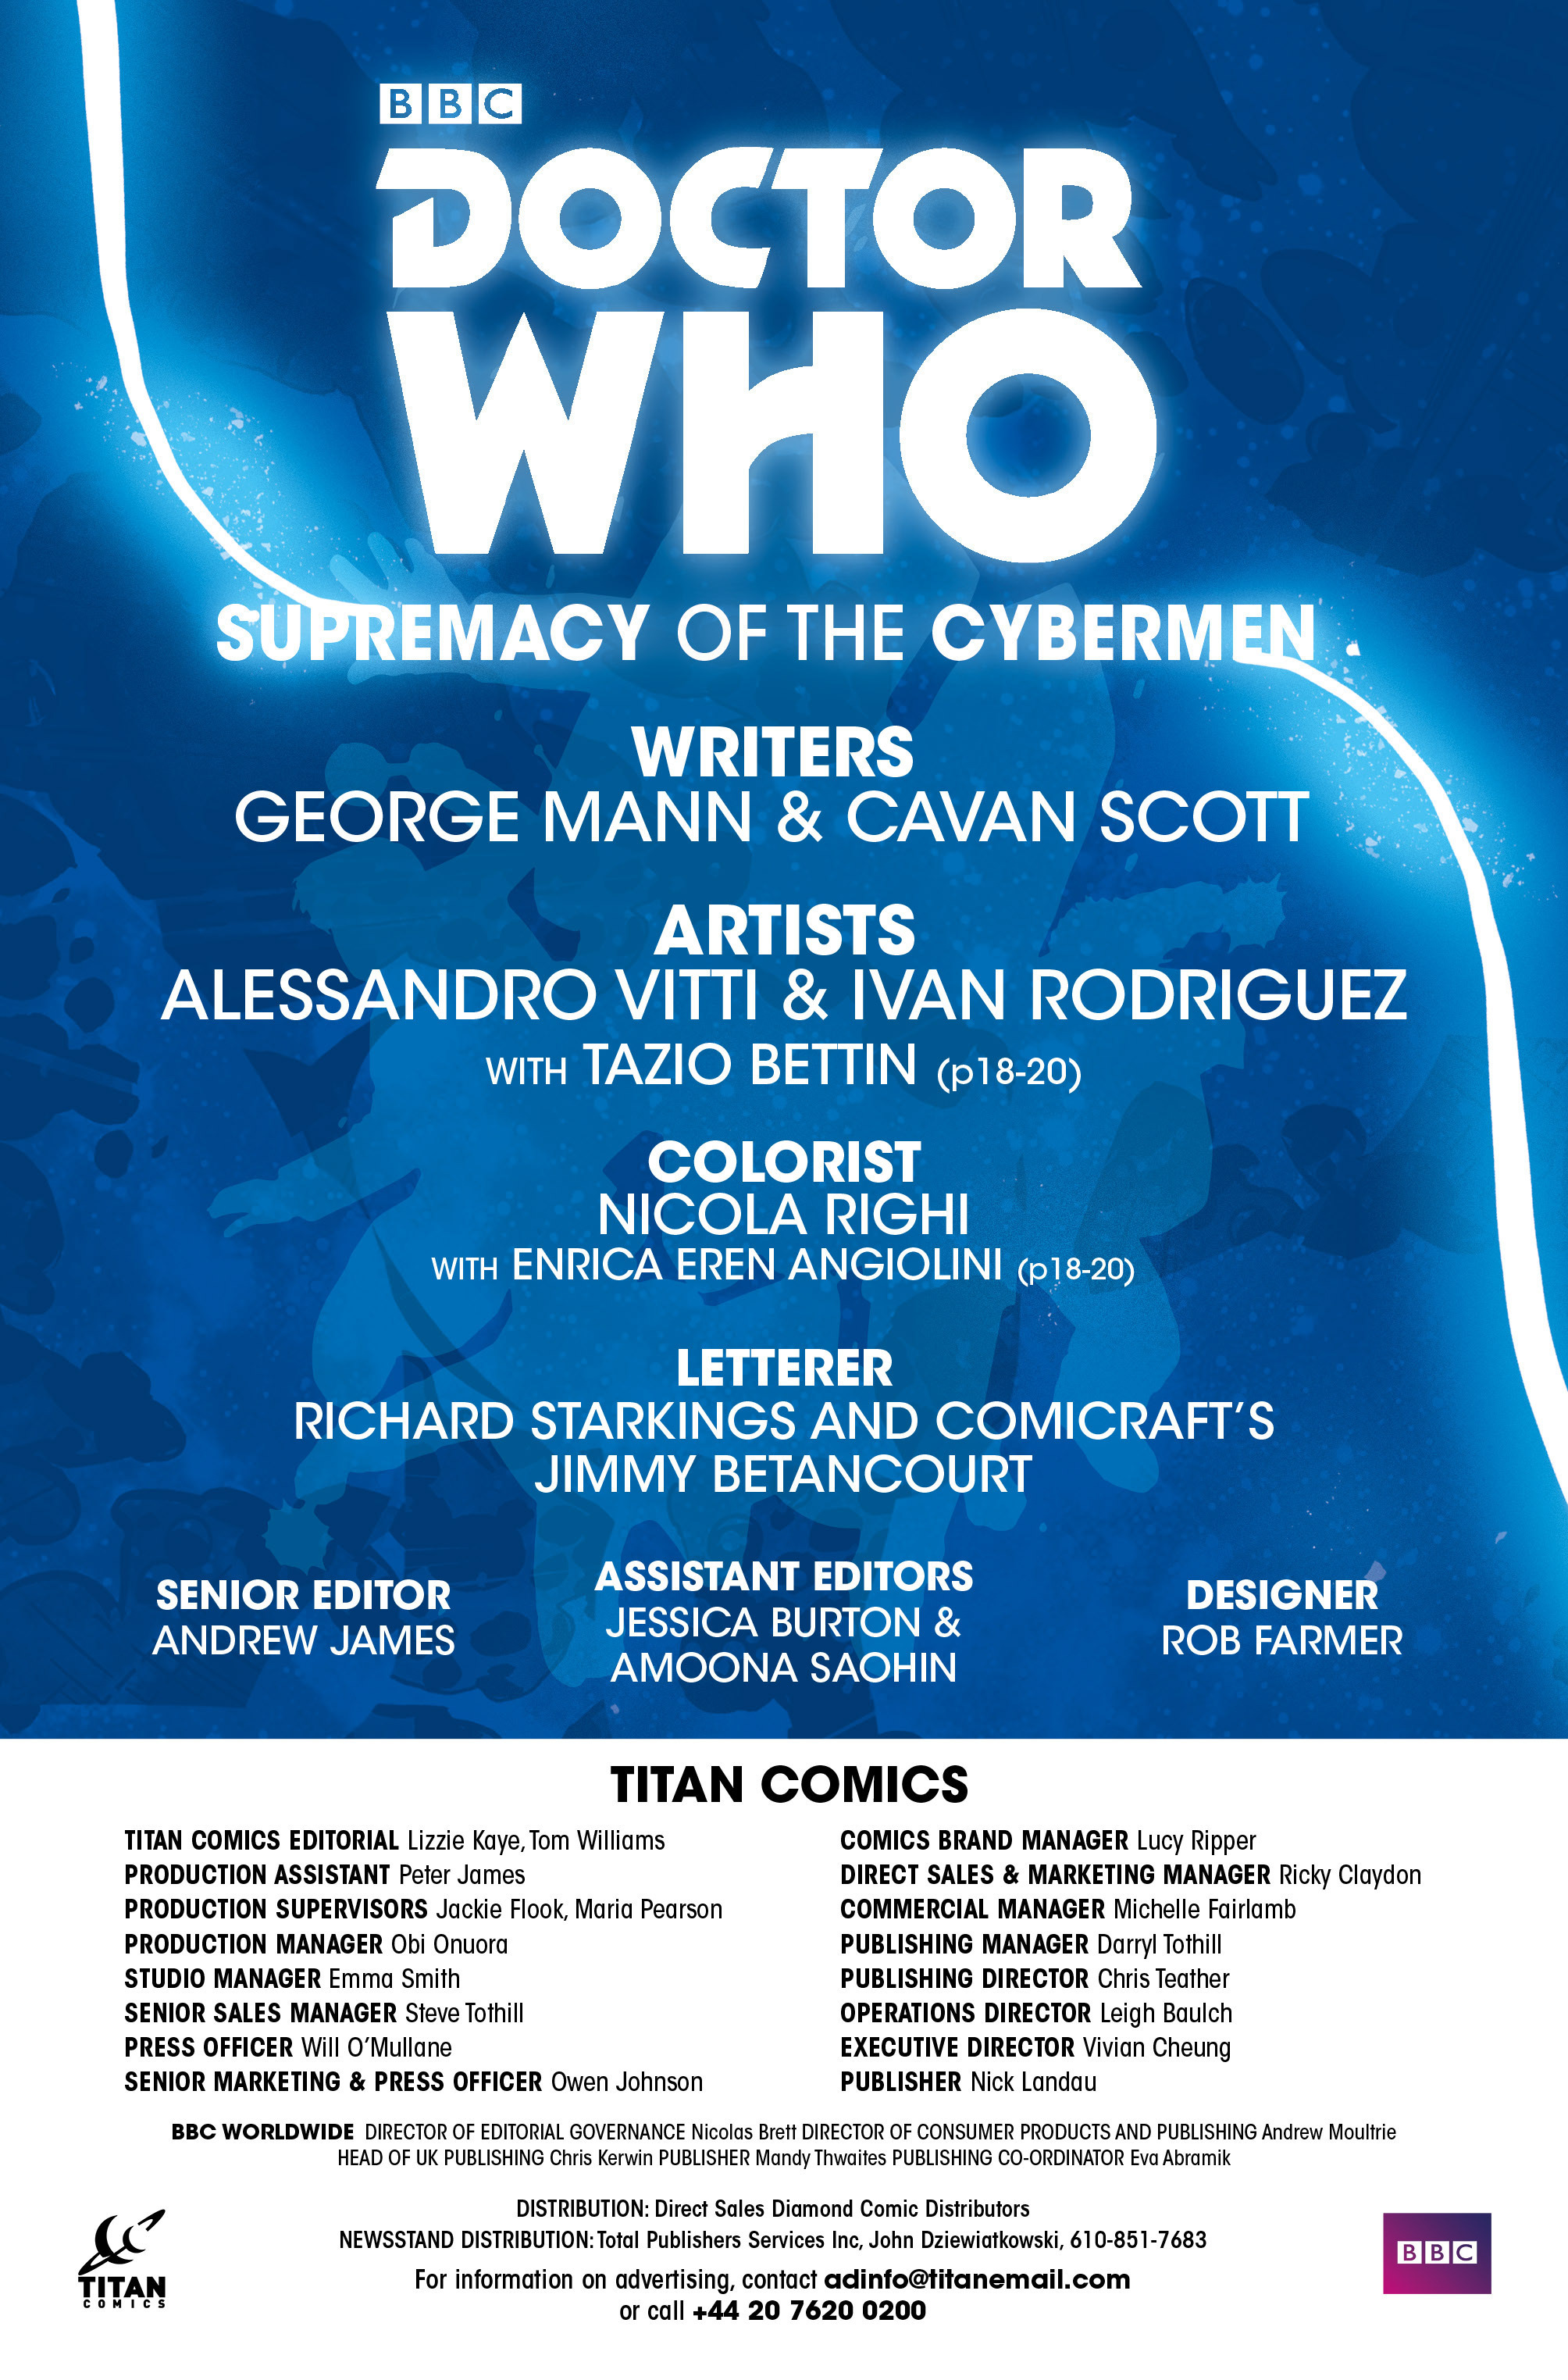 Read online Doctor Who Event 2016: Doctor Who Supremacy of the Cybermen comic -  Issue #1 - 7